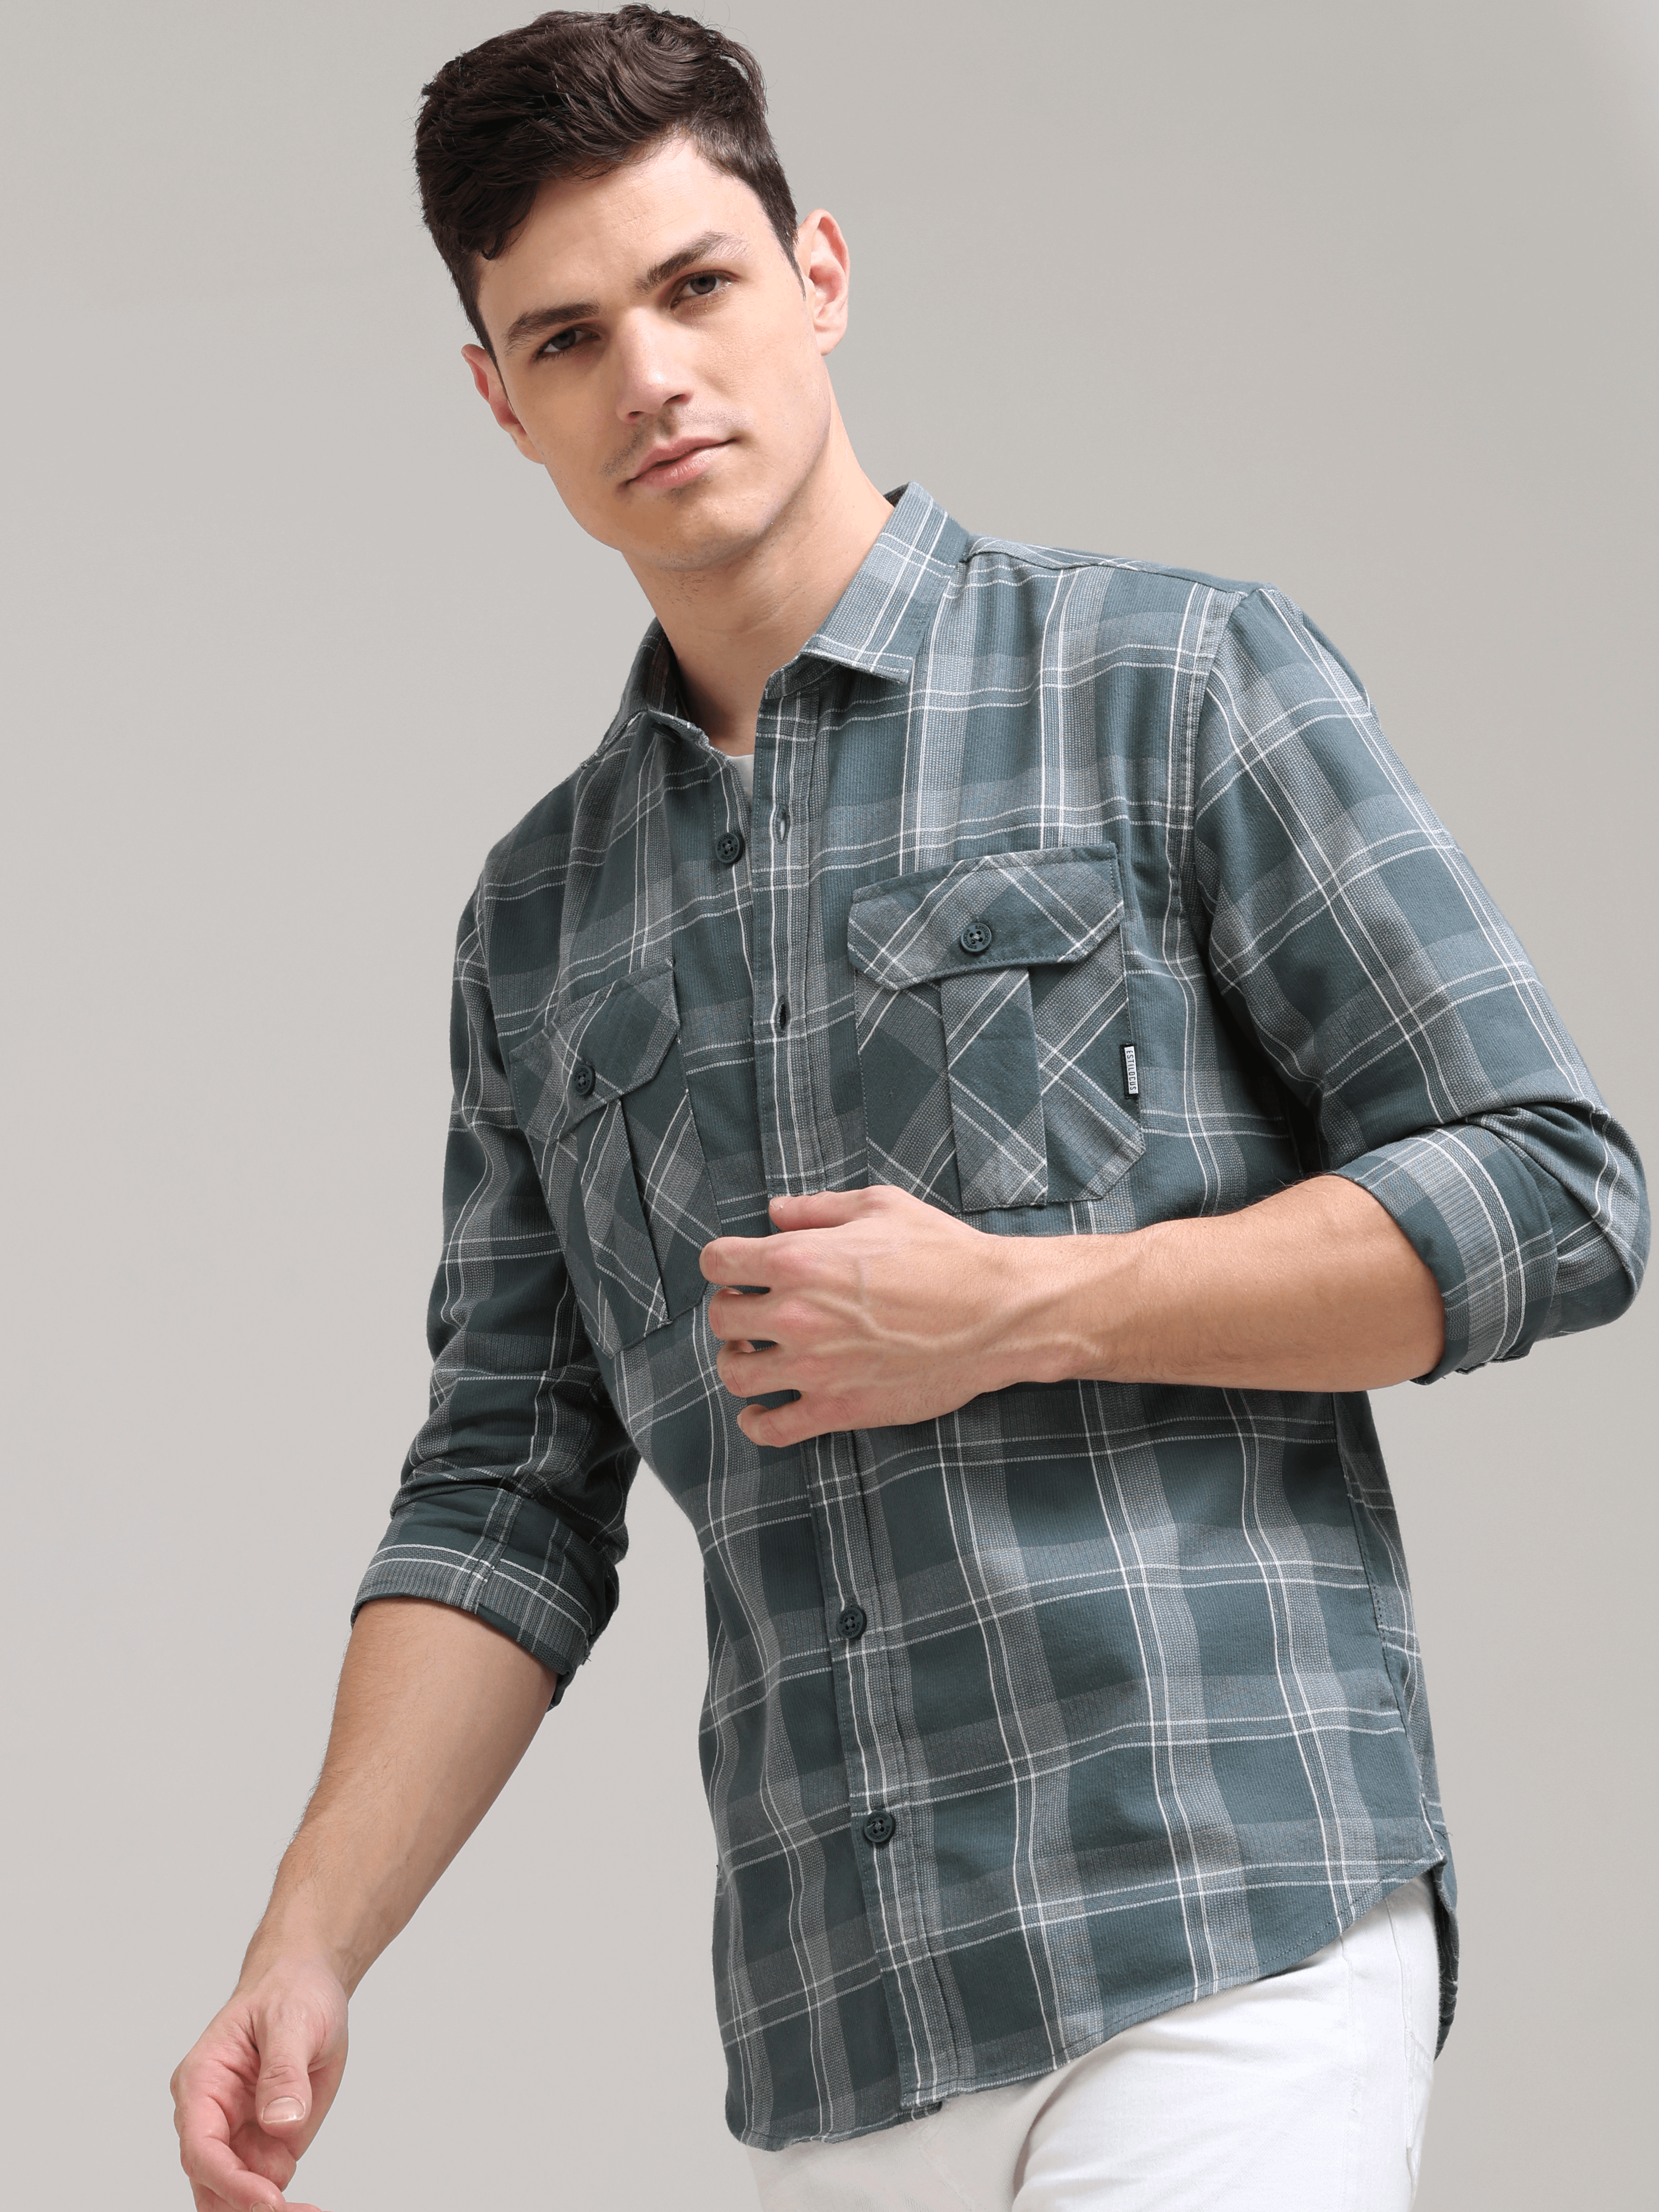 Caribbean Teal Grey Casual Check Shirt shop online at Estilocus. 100% Cotton • Full-sleeve check shirt• Cut and sew placket• Regular collar• Double button edge cuff• Double pocket with flap• Curved bottom hemline .• All double needle construction, finest